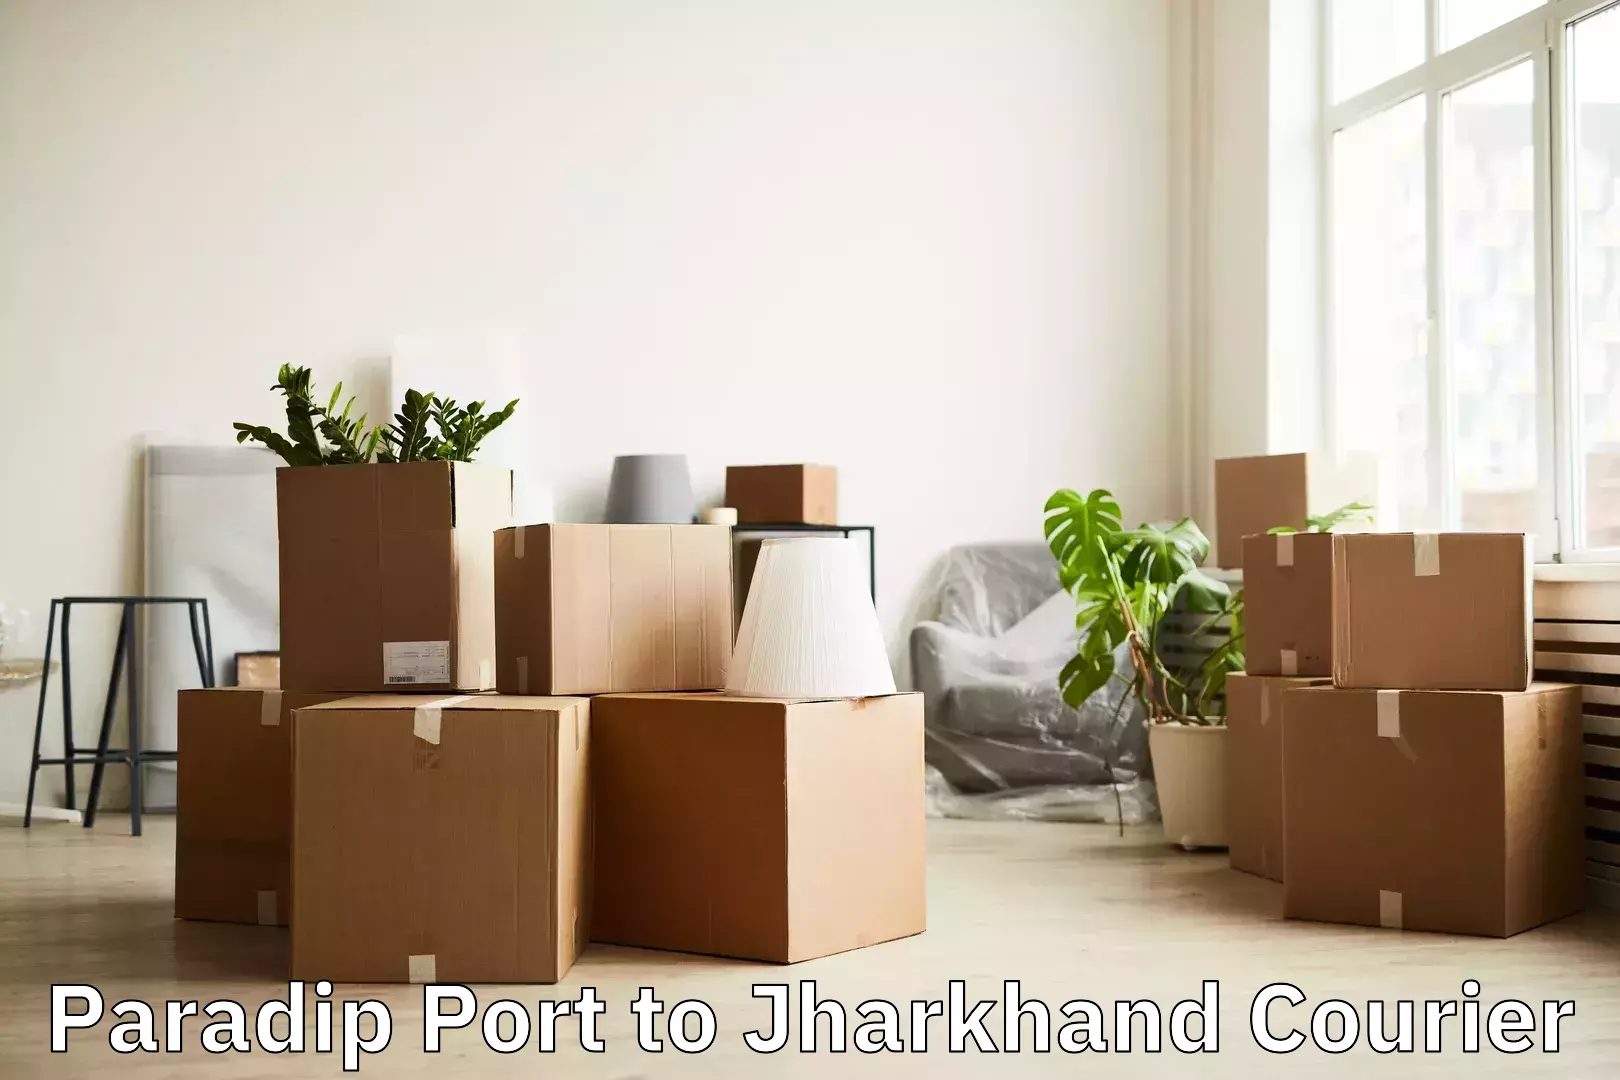 Online luggage shipping booking Paradip Port to Deoghar